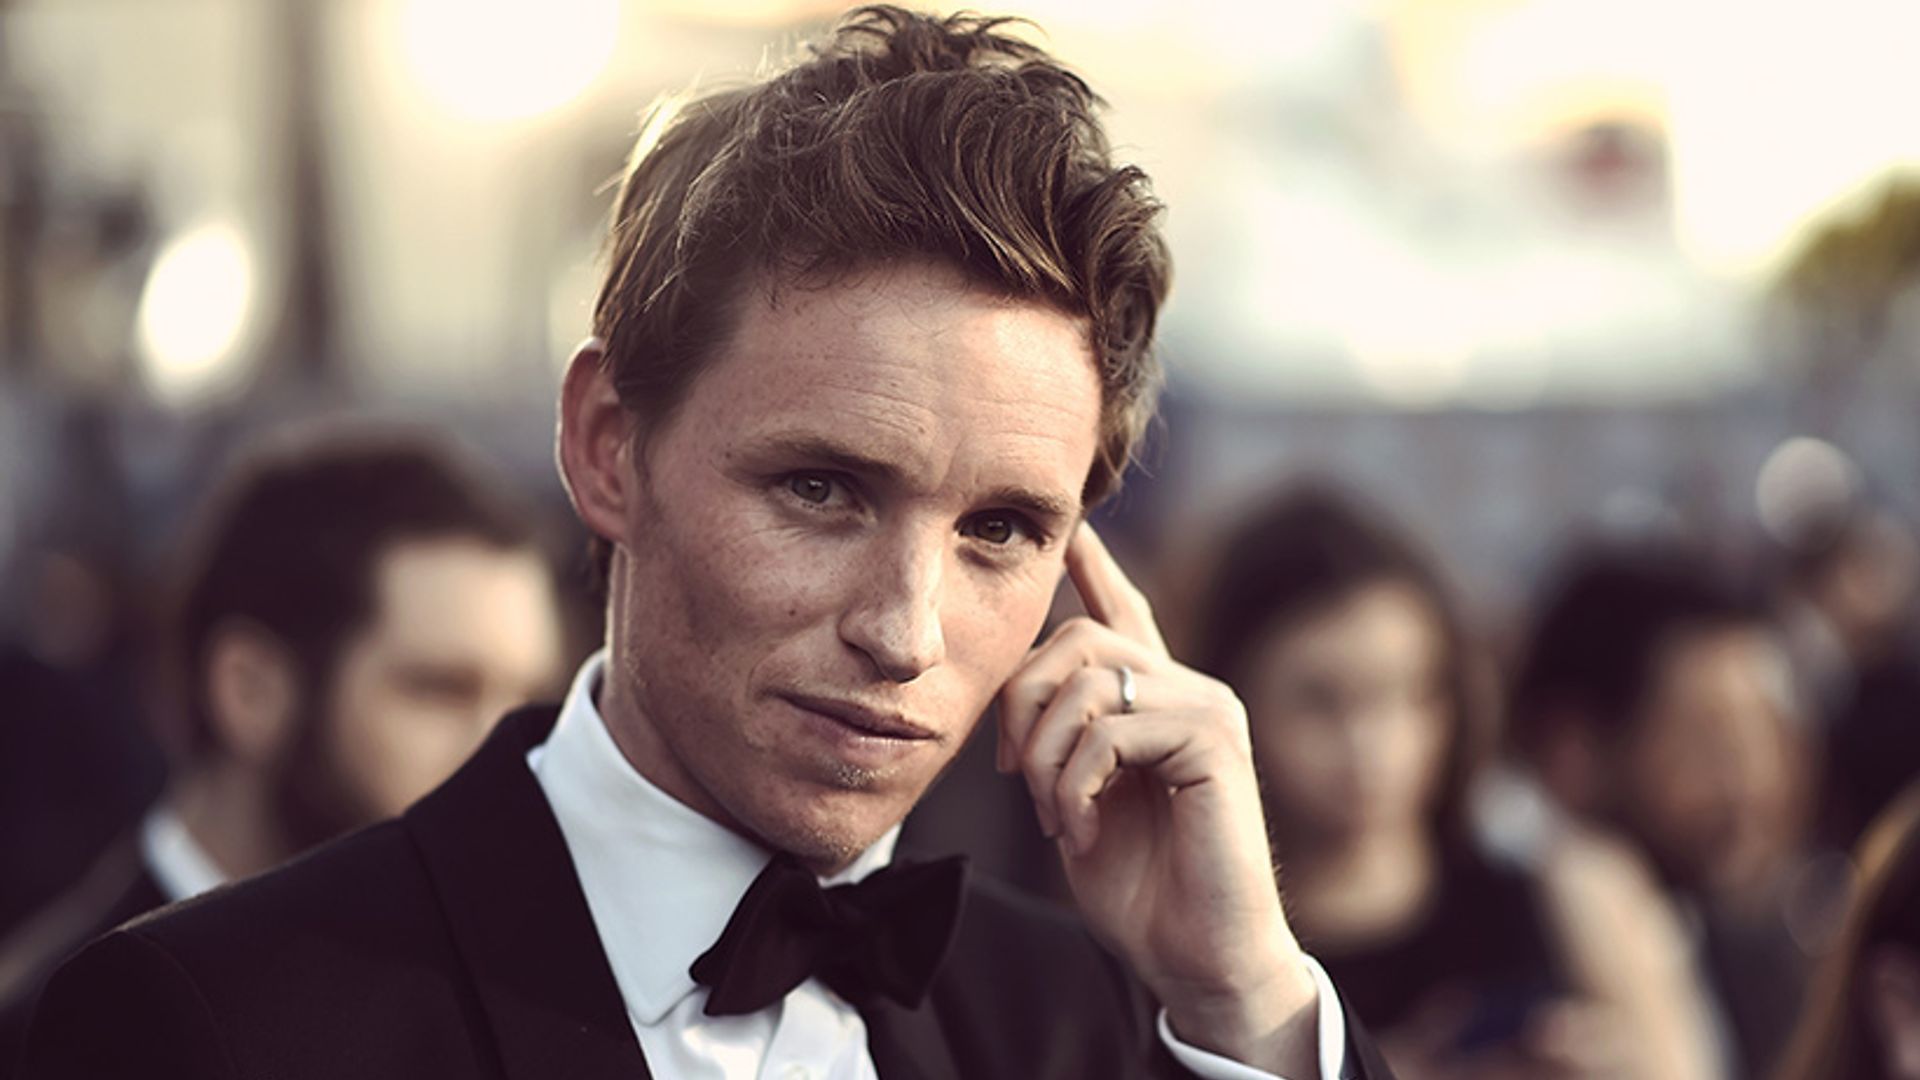 Eddie Redmayne responds to reports he once dated Taylor Swift